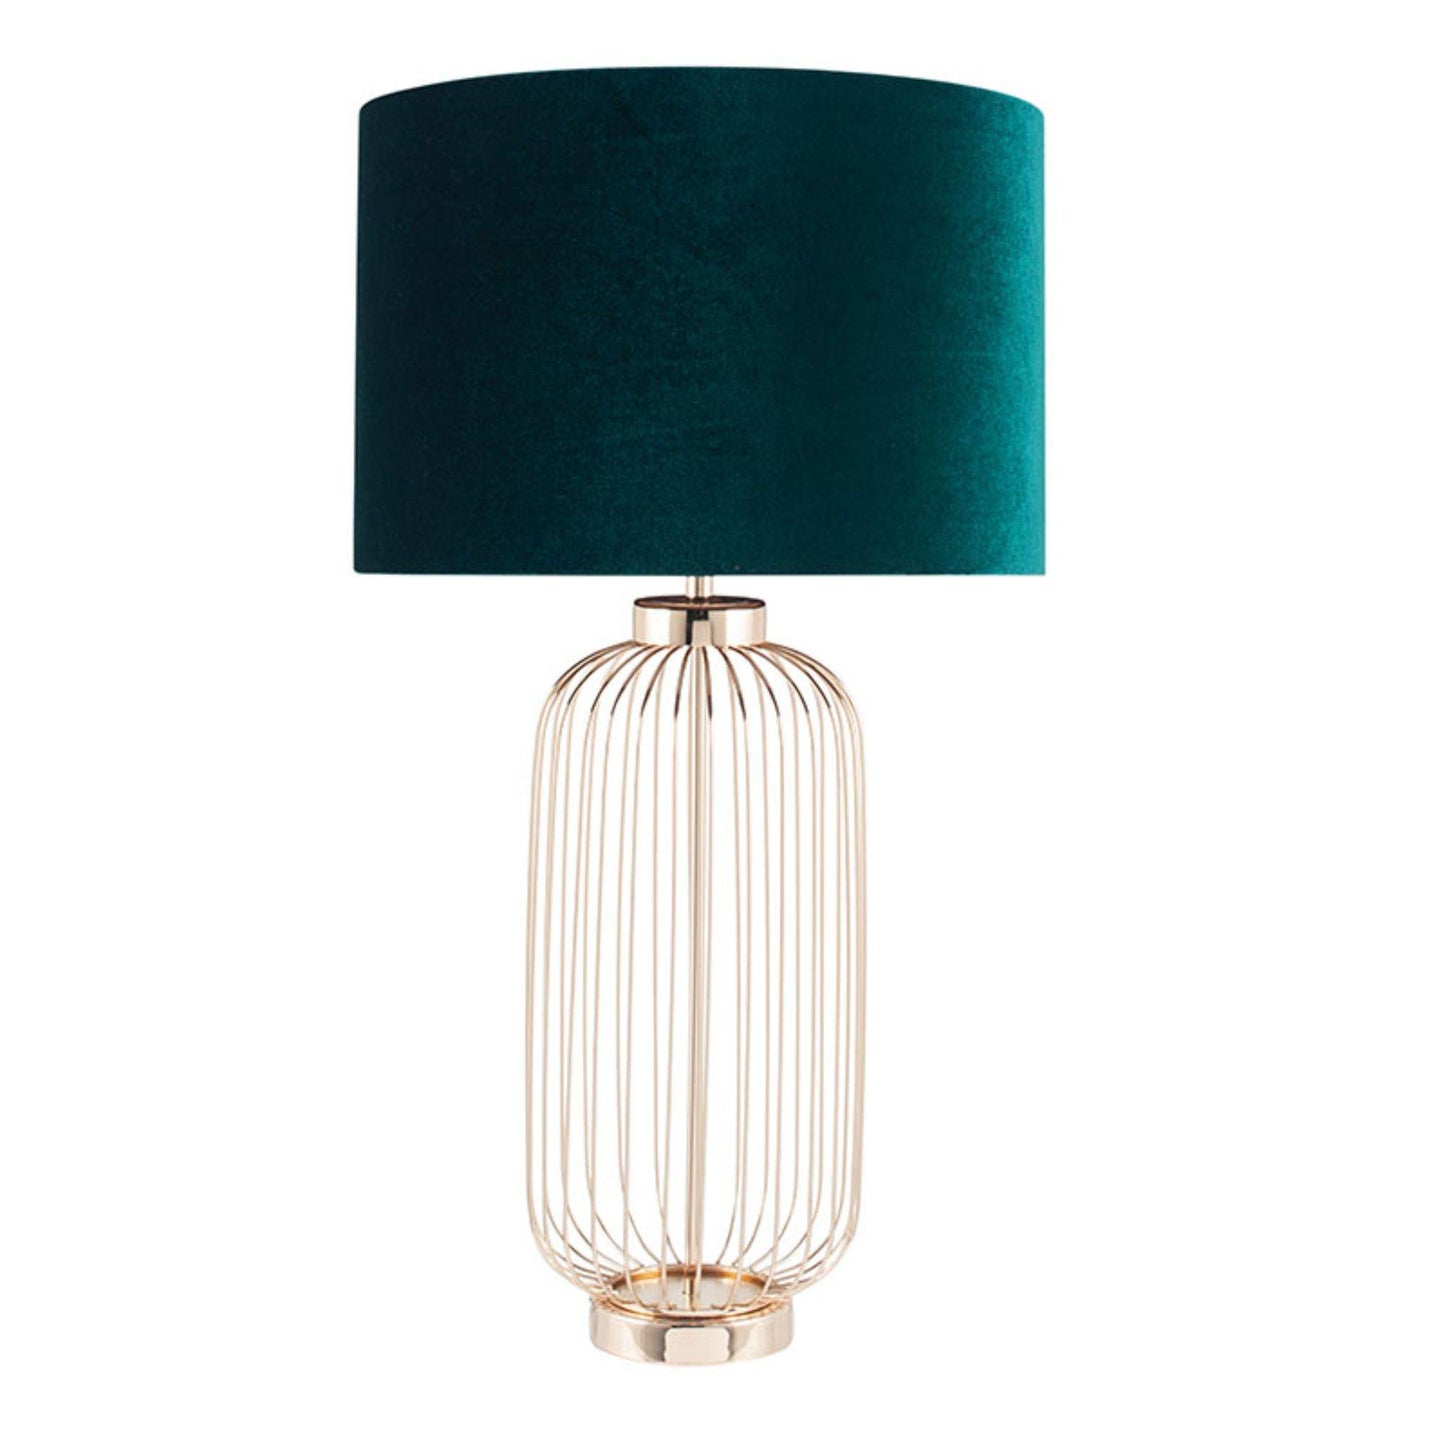 Dania French Gold 51cm Table Lamp with a Forest Green Velvet Shade